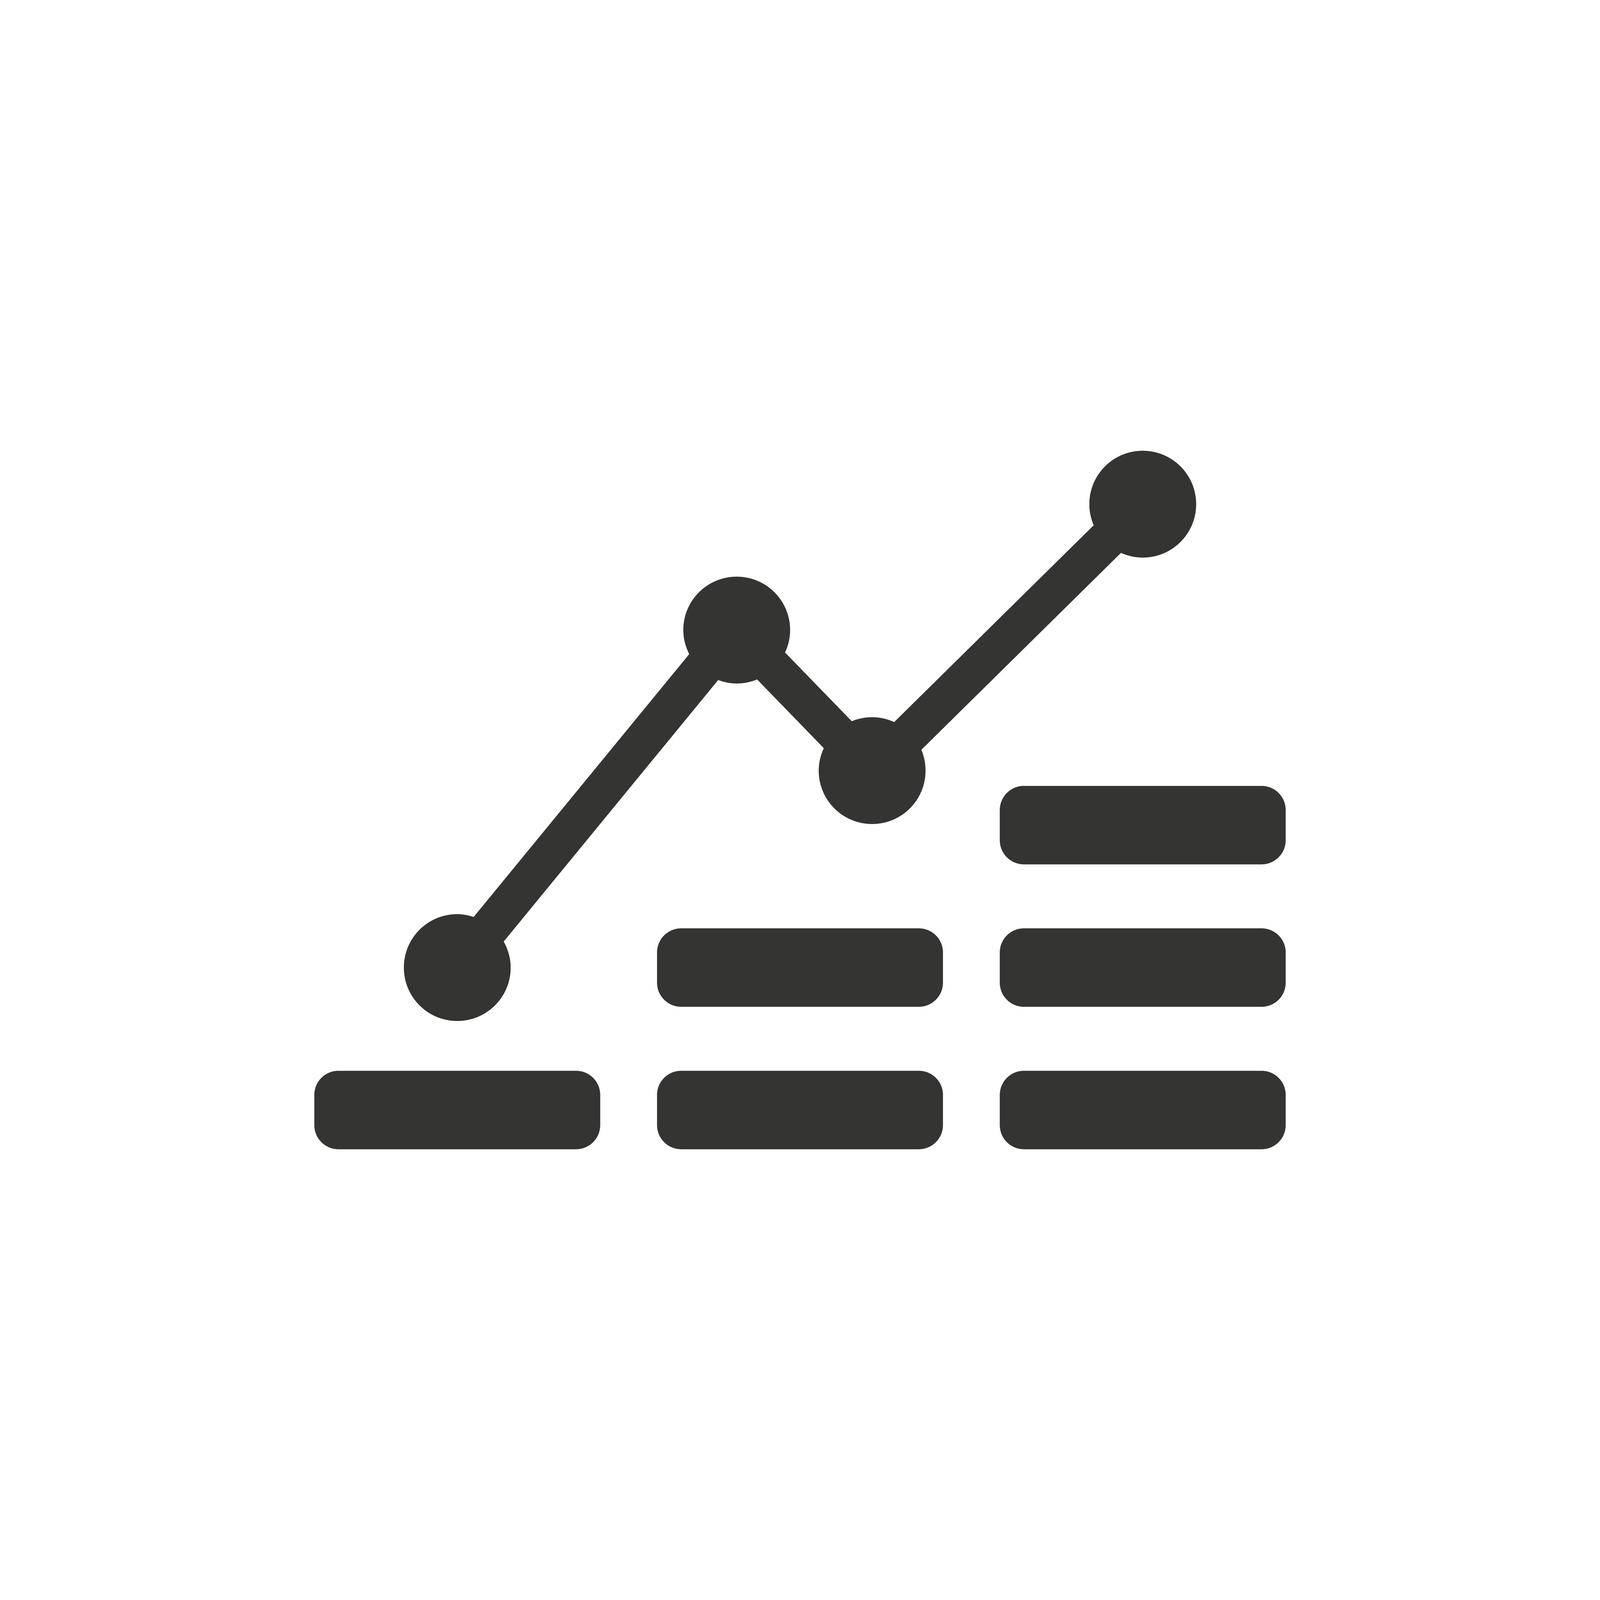 Financial Analysis Icon by delwar018